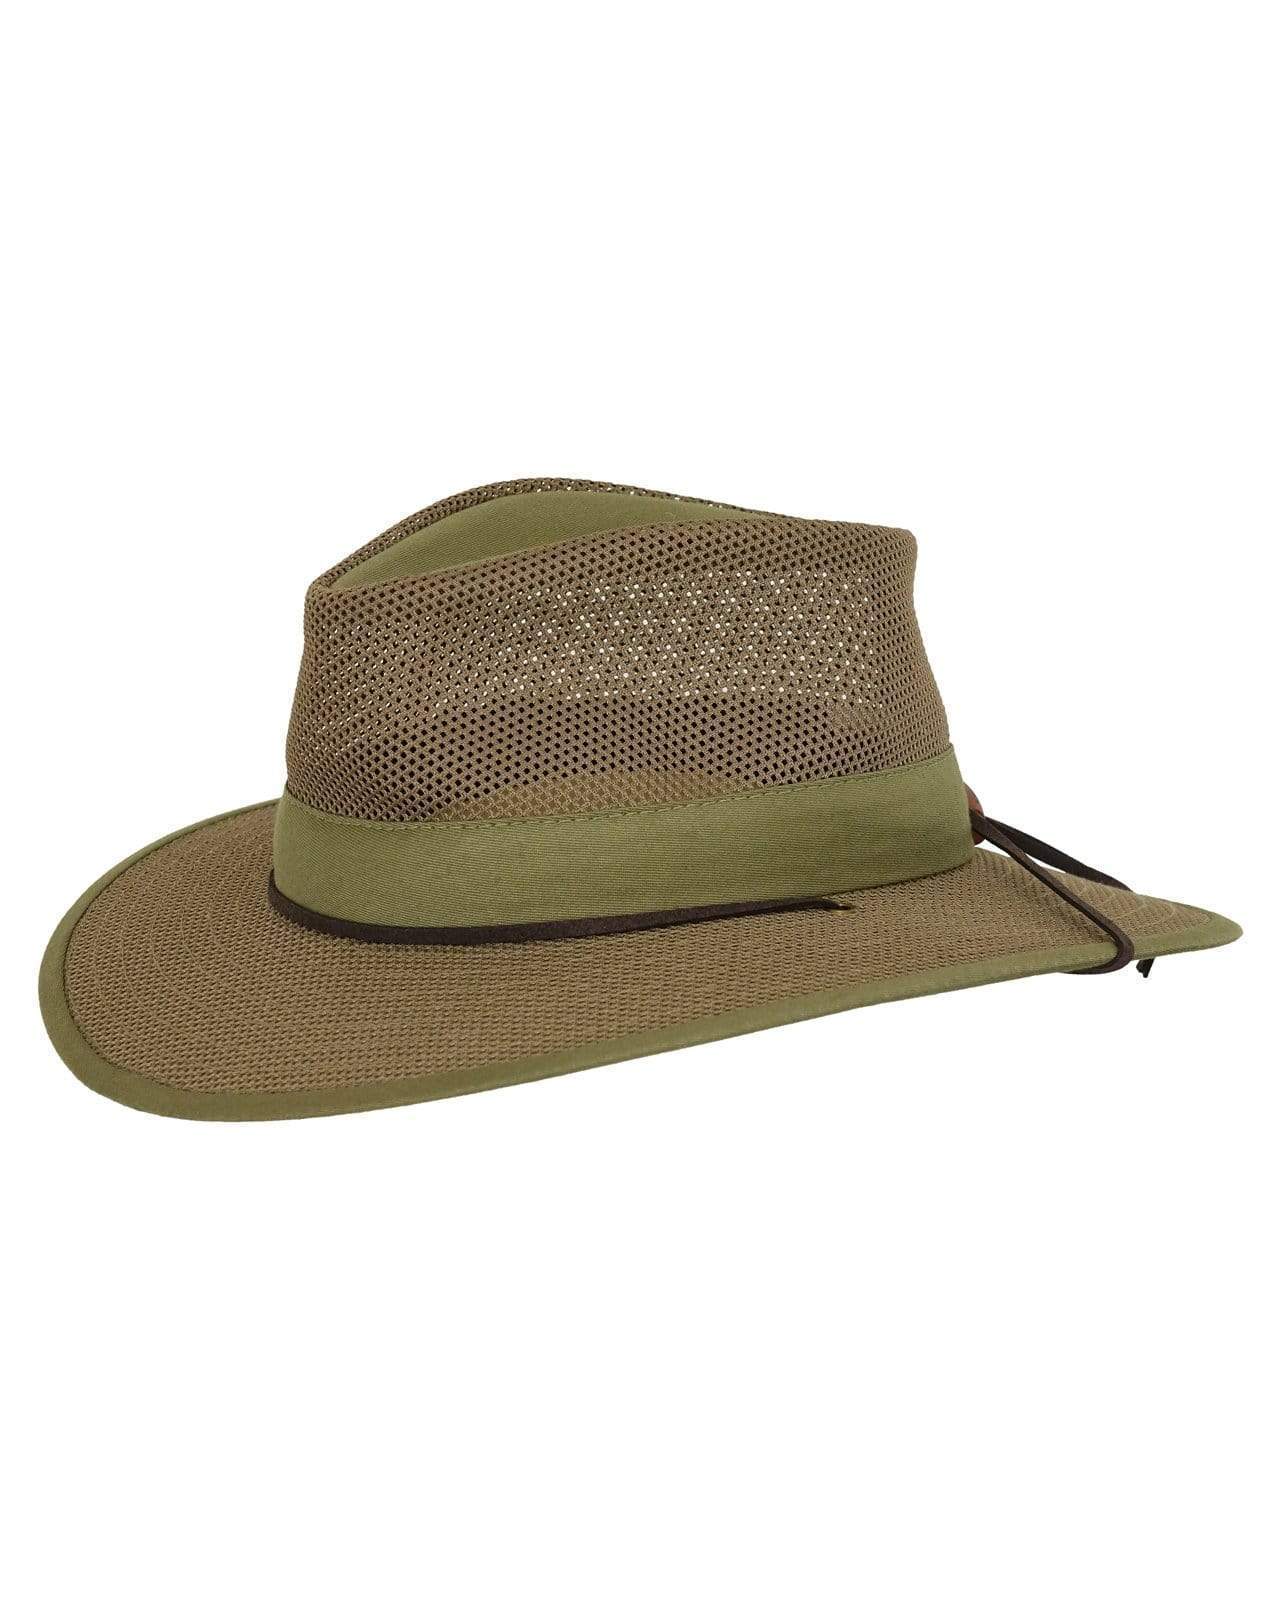 Stirling Creek  Outdoor Hats by Outback Trading Company –